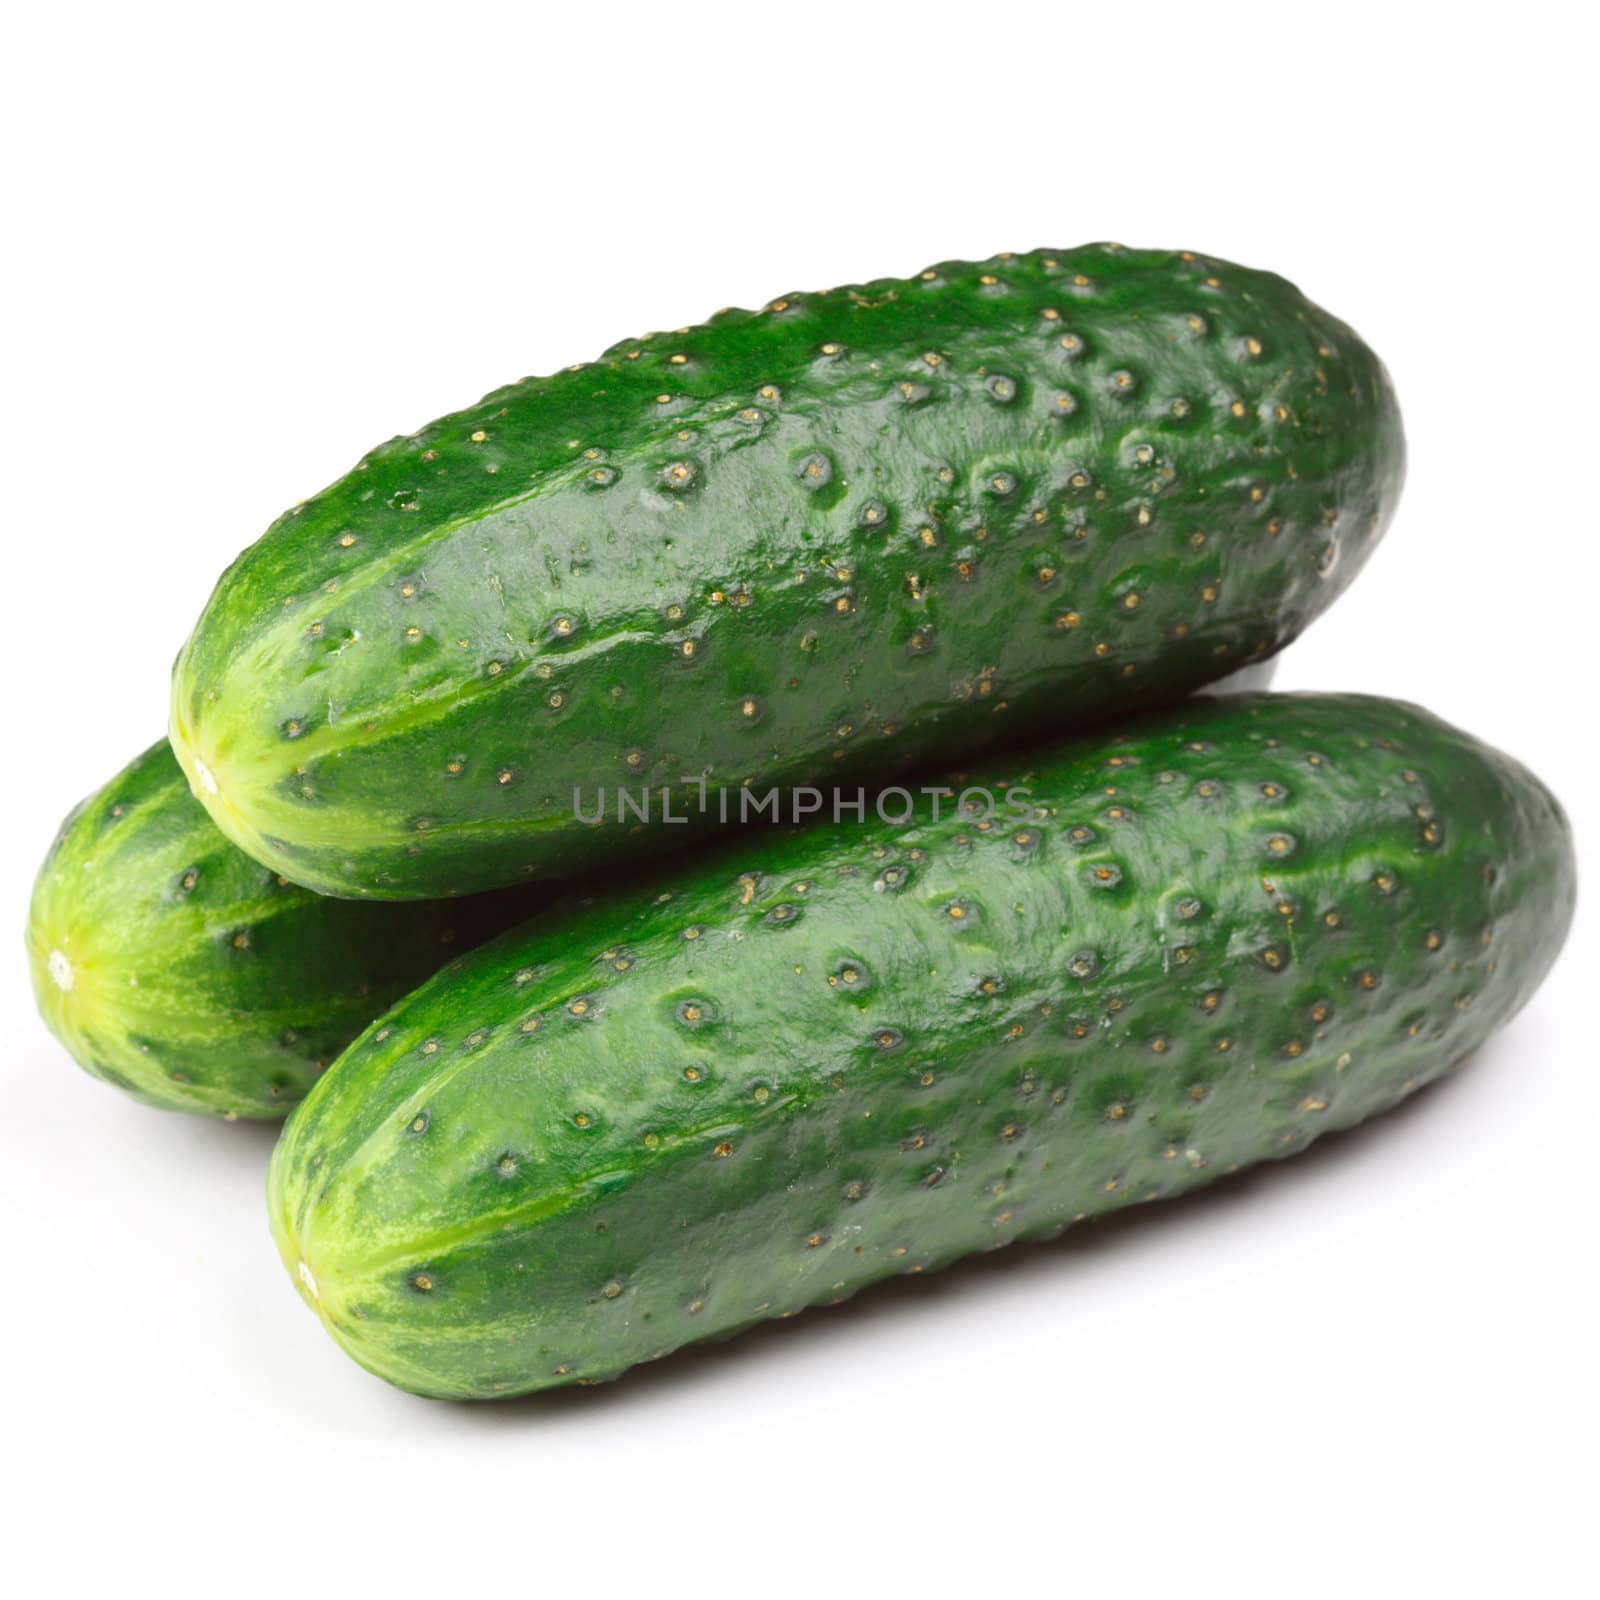 Three green cucumbers isolated on white background